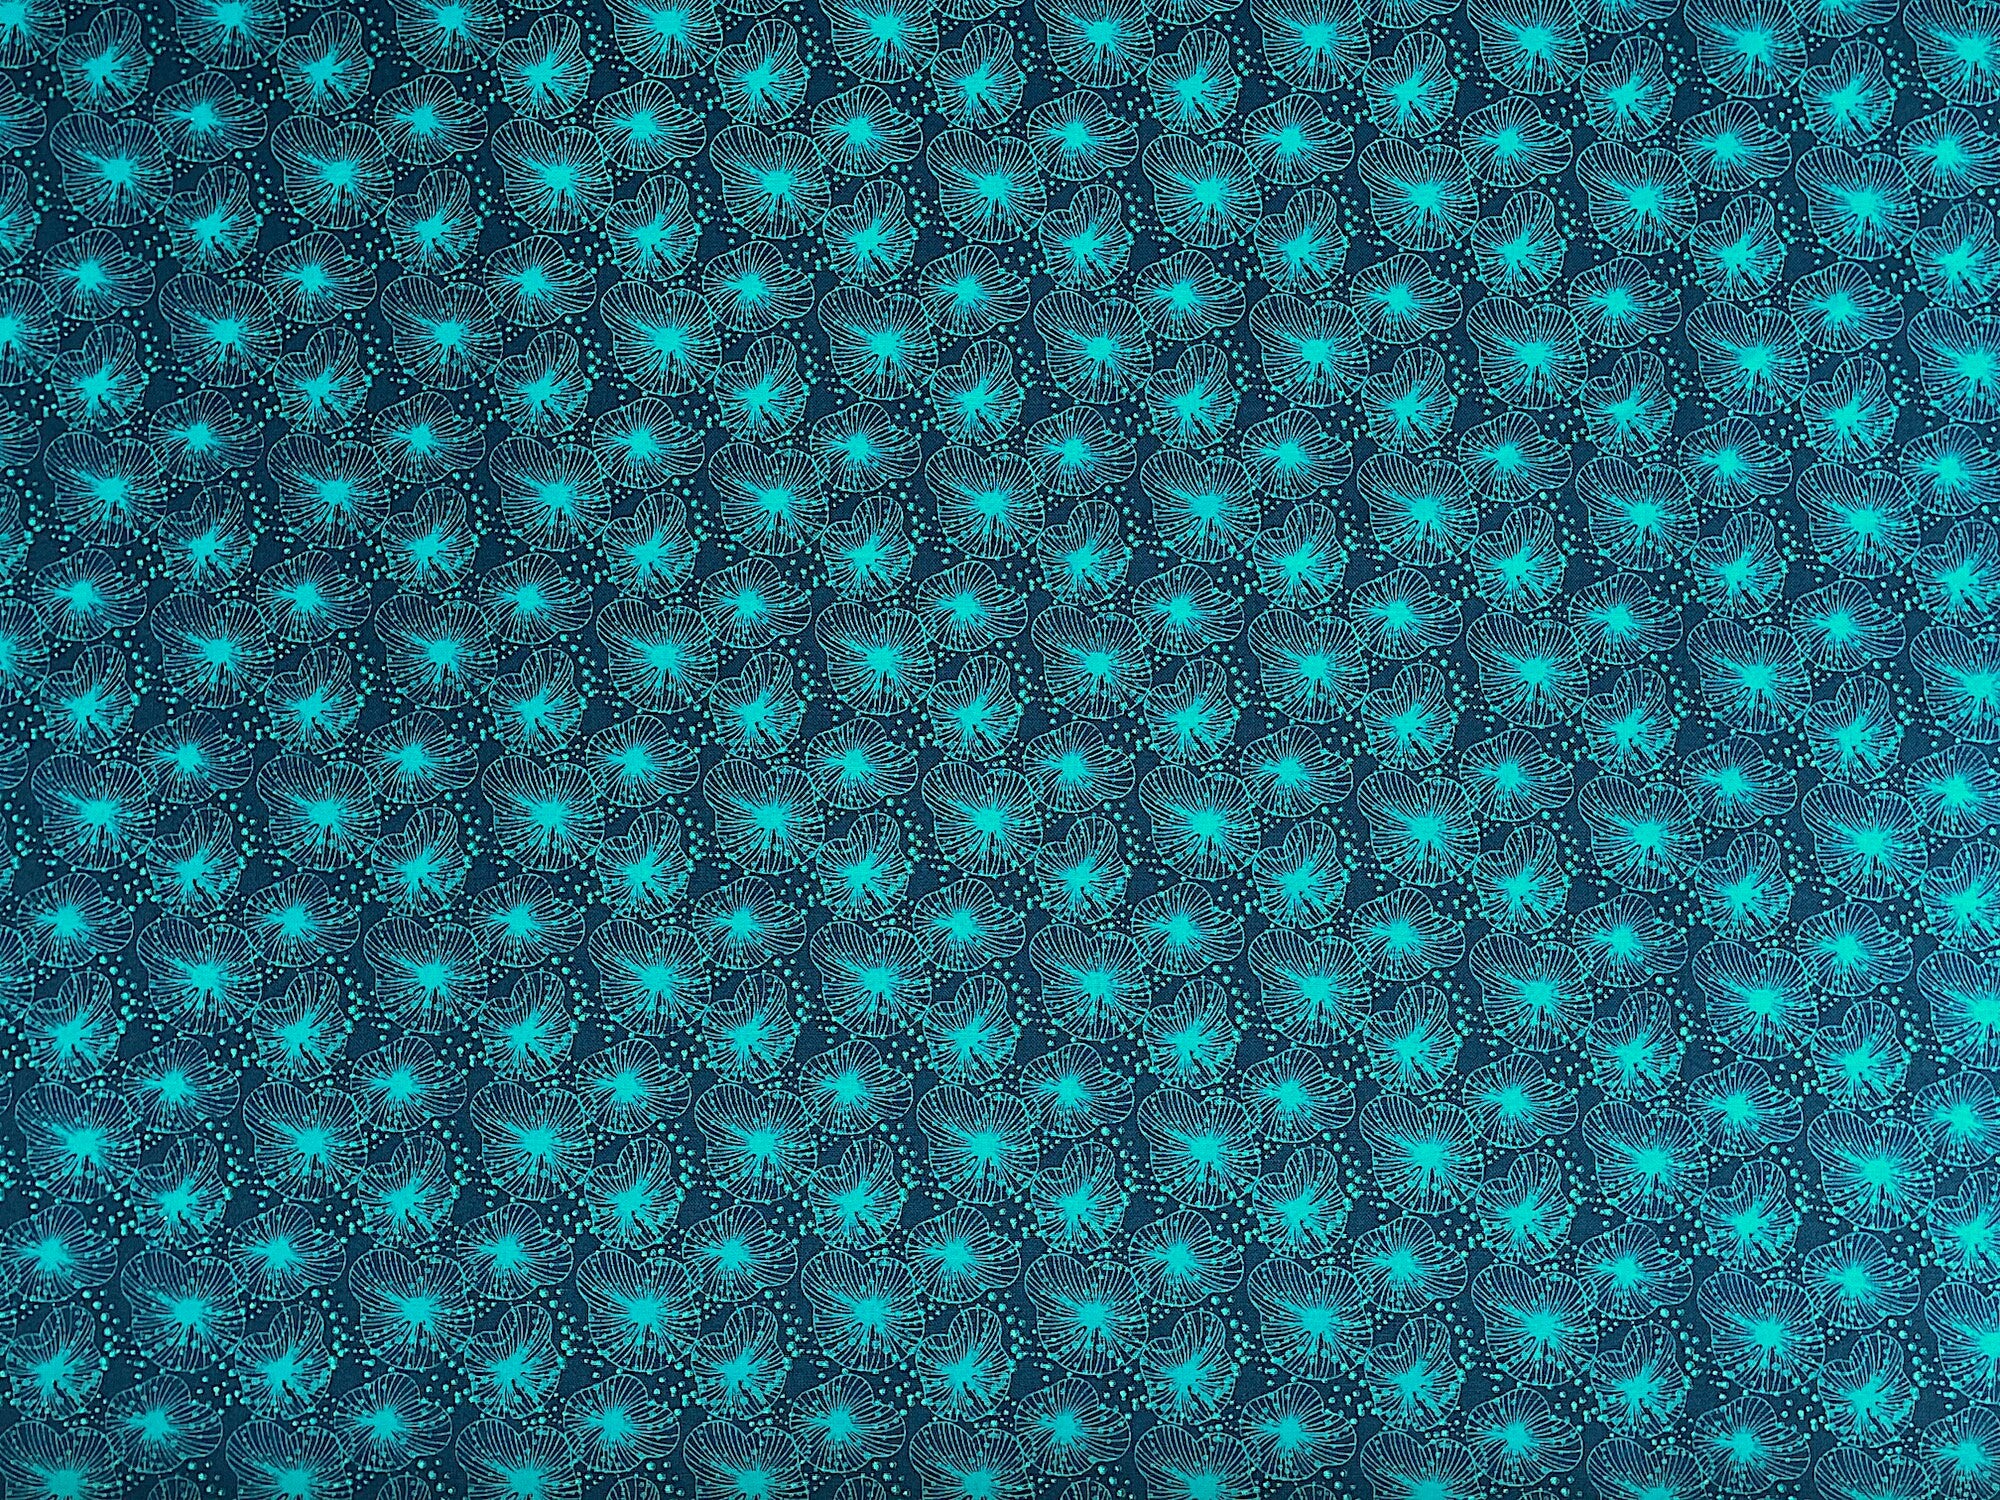 This fabric is part of the Koi Garden collection by Nancy Archer. This dark teal cotton fabric is covered with textured lily pads